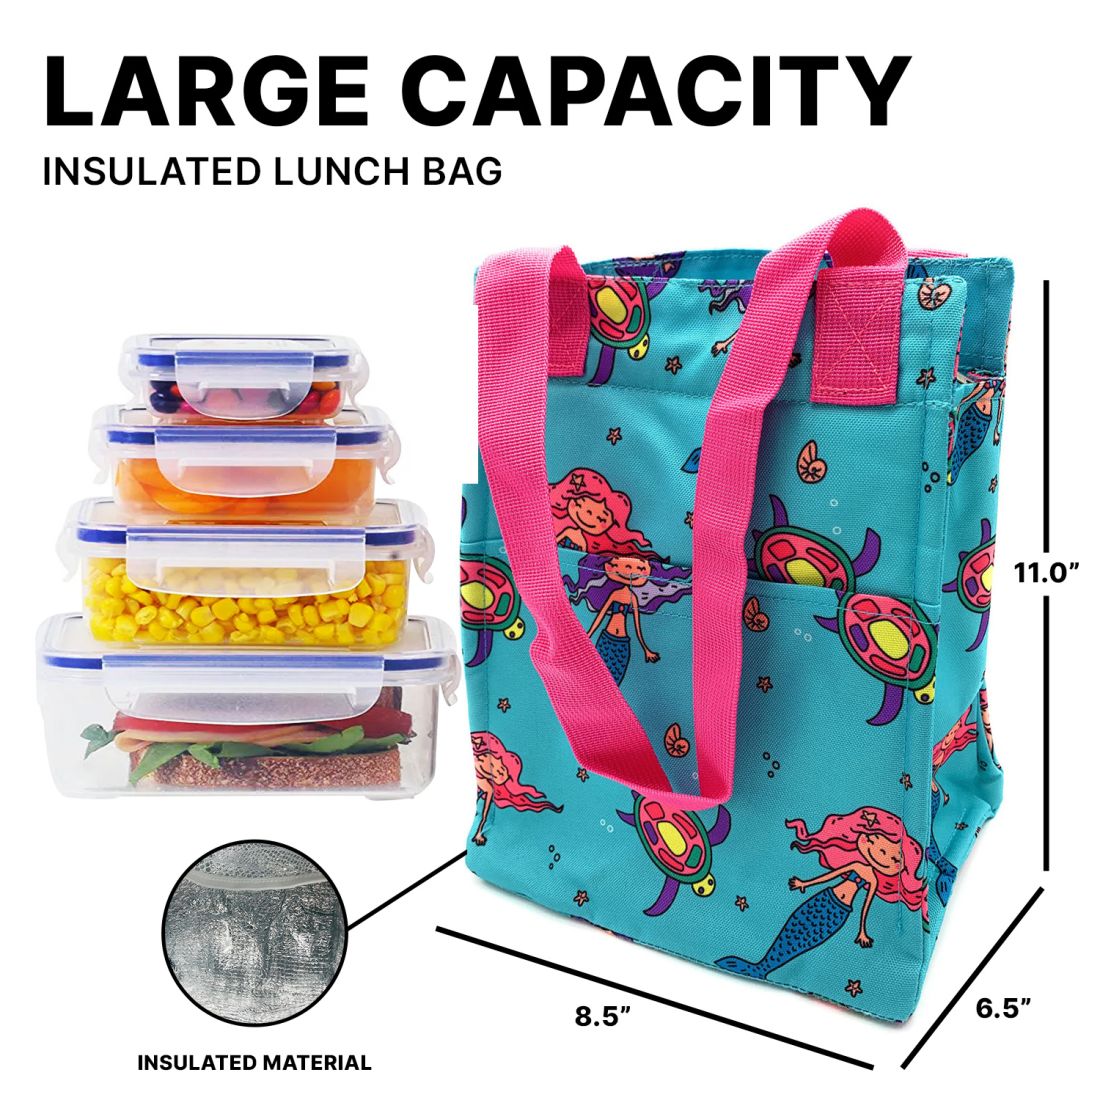 Empire Cove Insulated Lunch Bag Kids Adults Cooler Food Tote Picnic Travel Mermaid